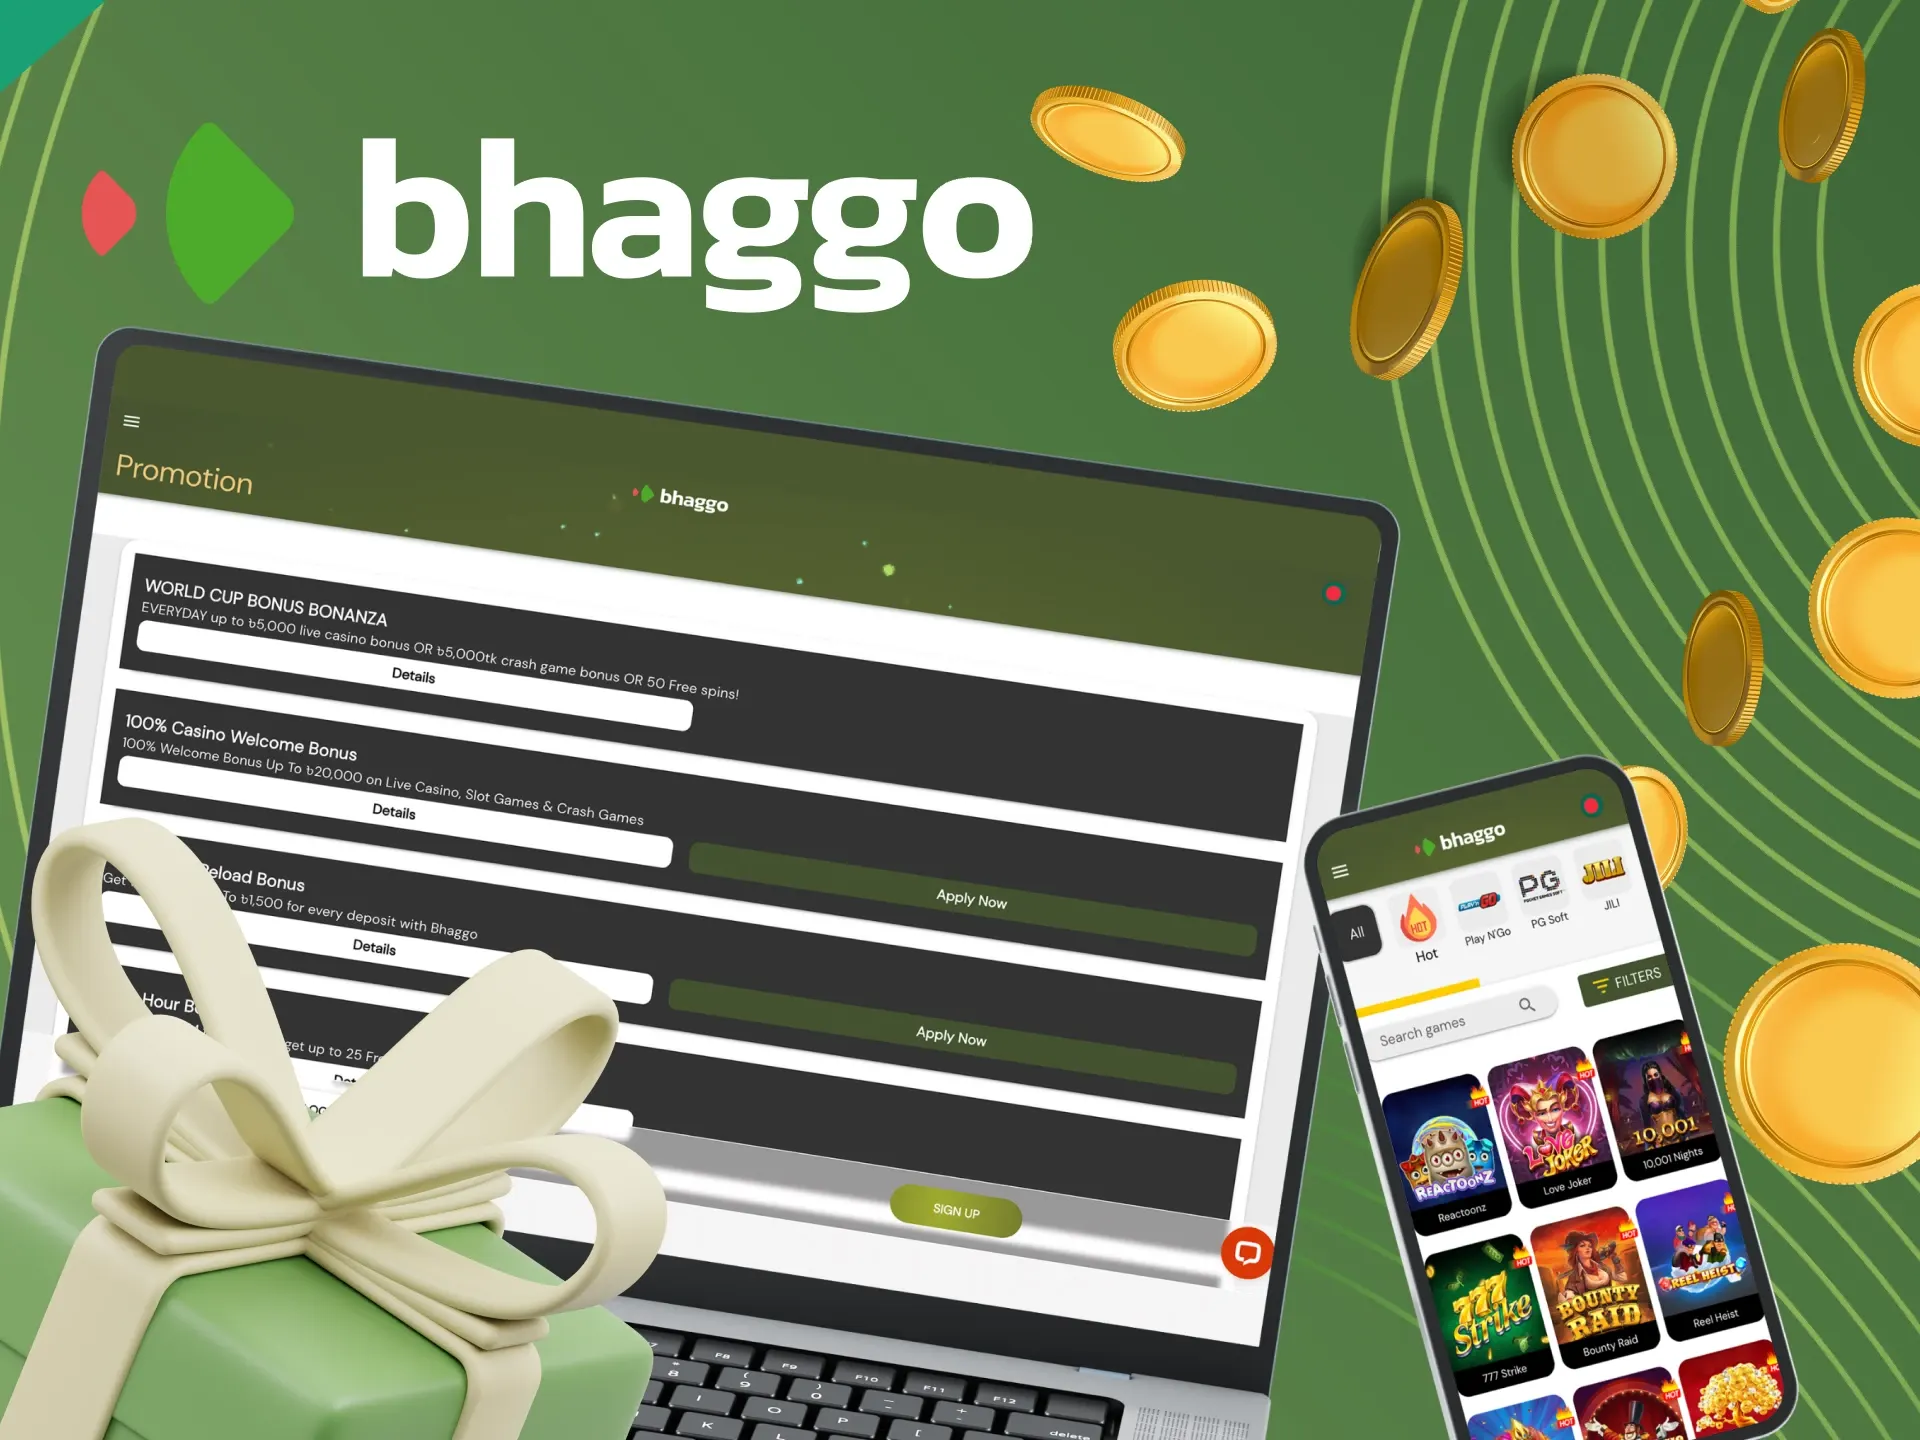 Promotions and welcome bonuses for slot players at Bhaggo.